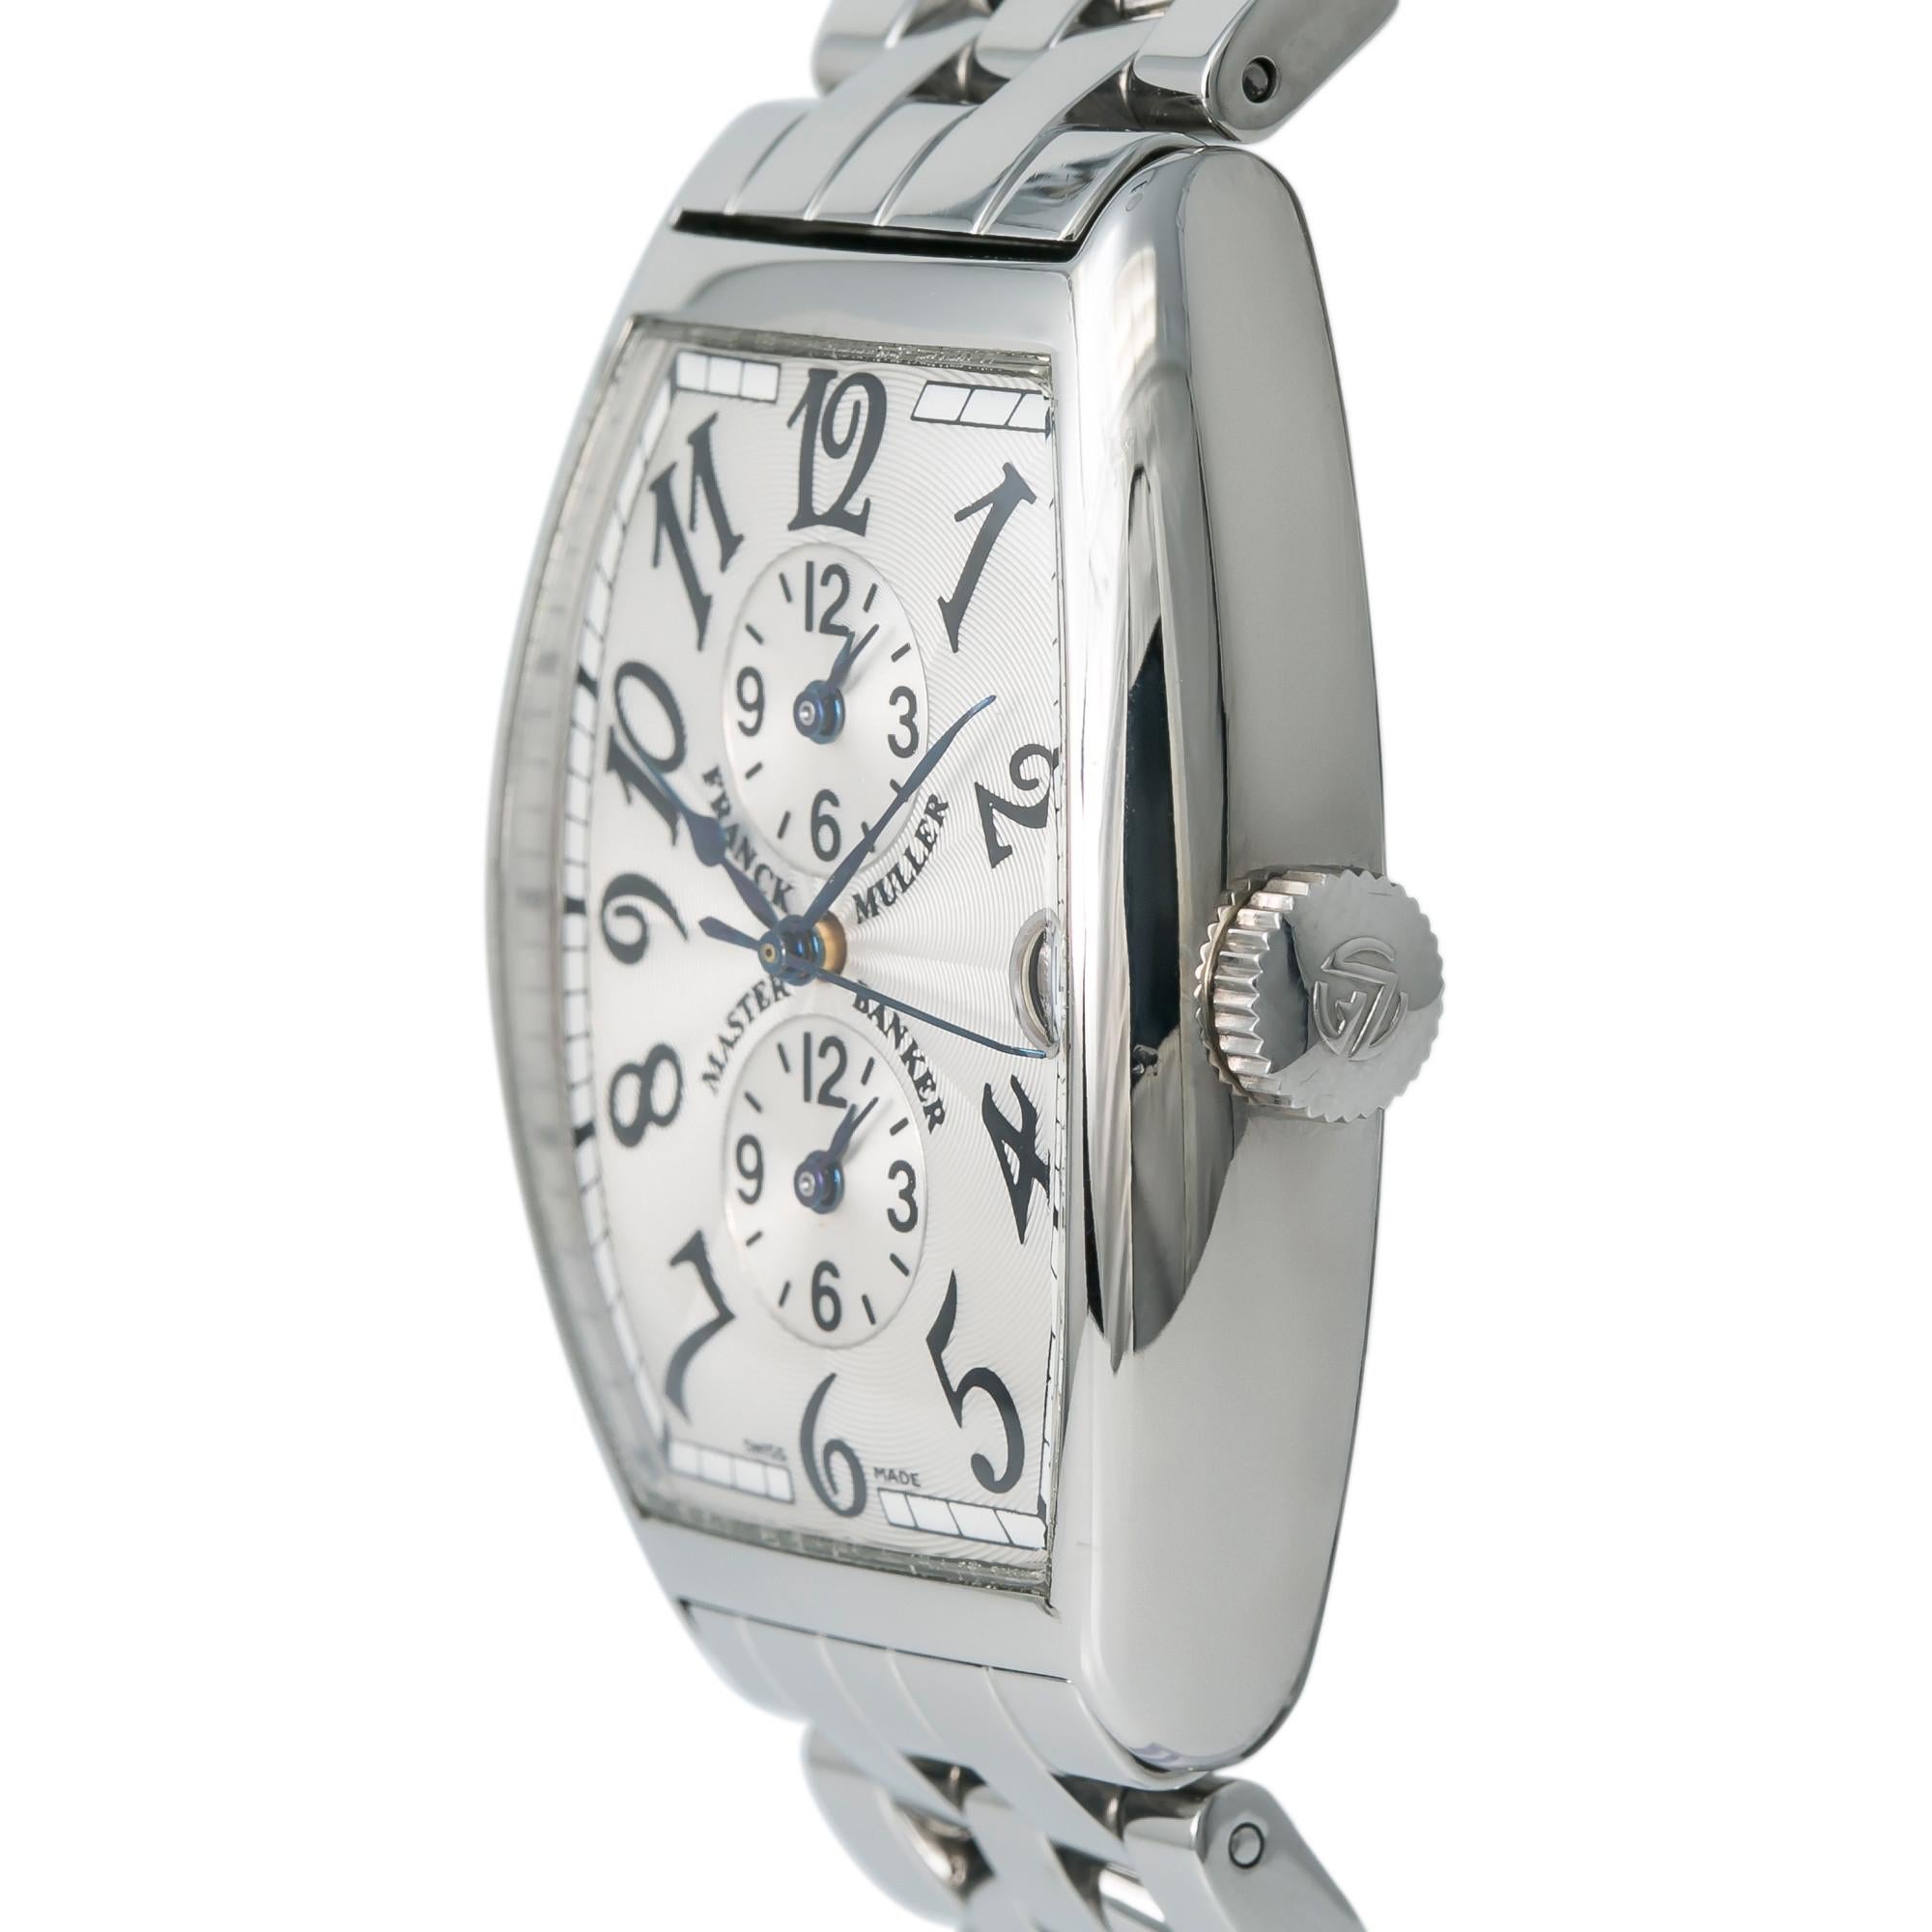 Modern Franck Muller Master Banker 5850 Men's Automatic Watch Stainless Steel For Sale